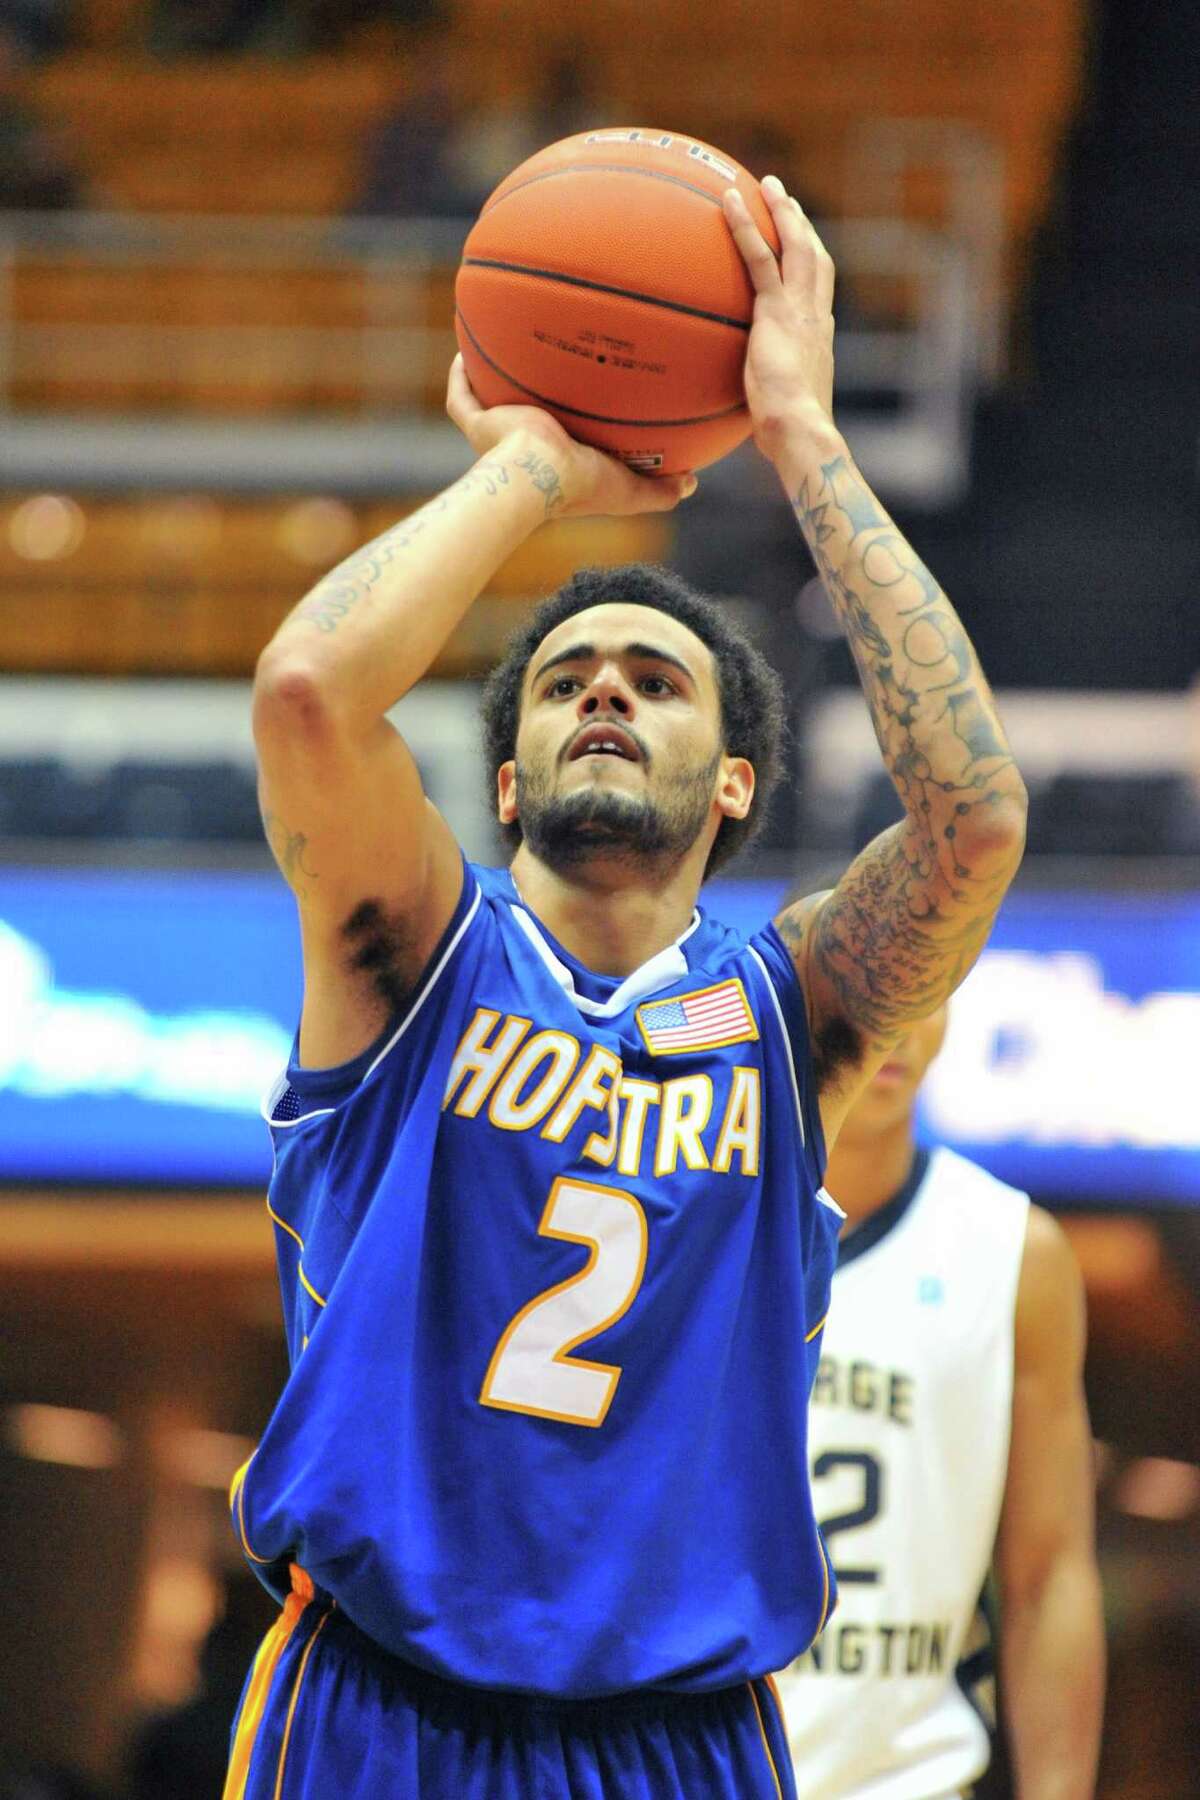 WASHINGTON, DC - NOVEMBER 24: Taran Buie #2 of the Hofstra Pride takes a foul shot during the game against the George Washington Colonials on November 24, 2012 at the Smith Center in Washington, DC. The Colonials won 80-56. (Photo by Mitchell Layton/Getty Images)